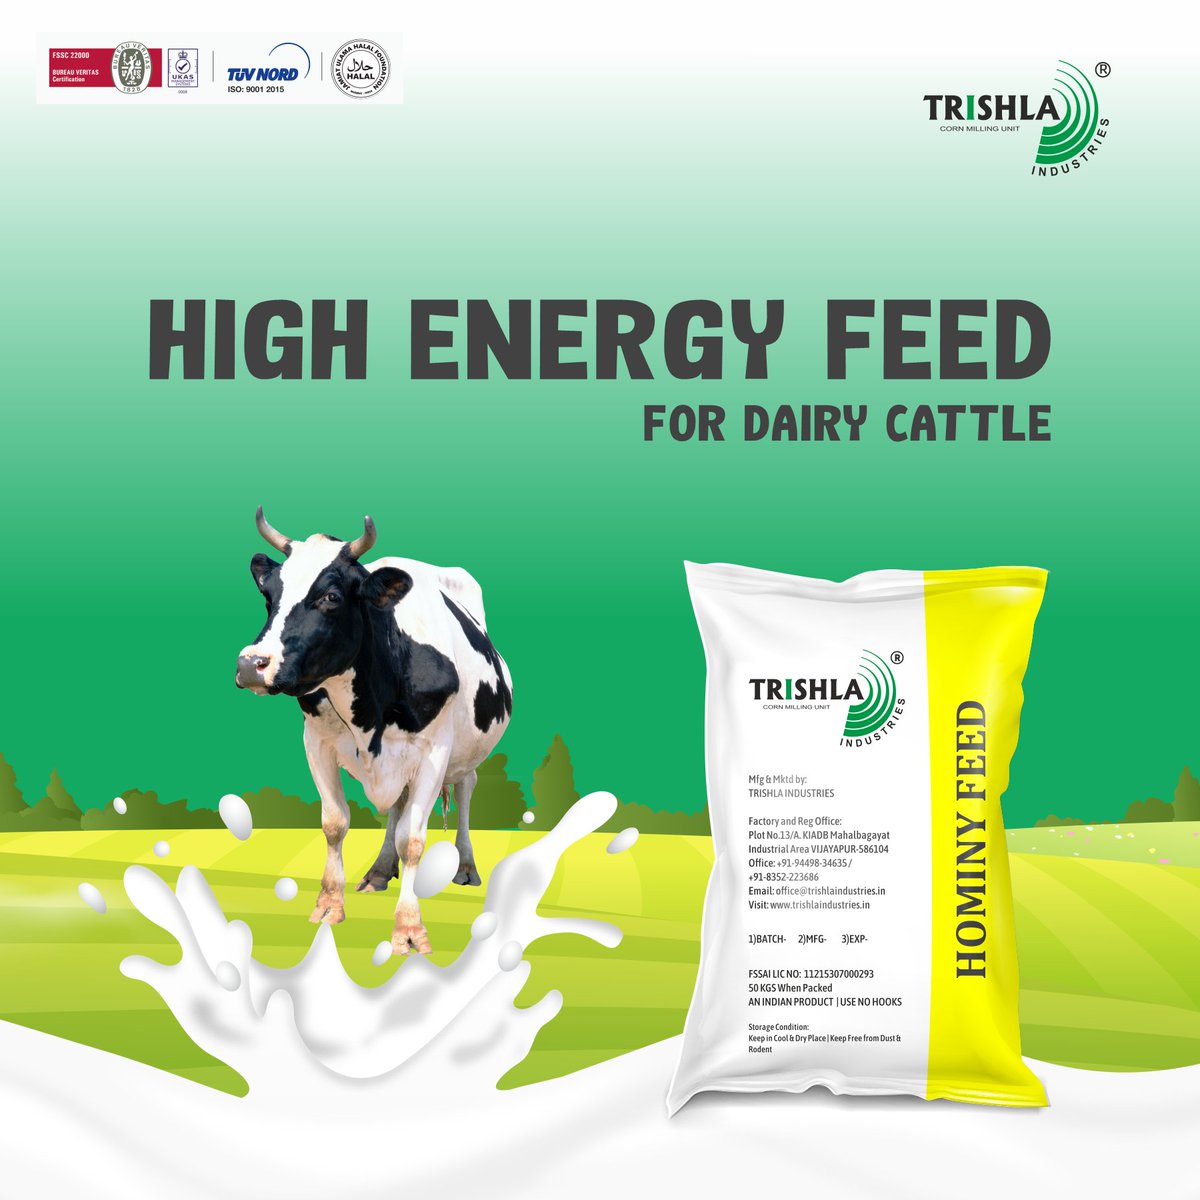 Are you looking for a reliable supplier of export-quality cattle feed?

#HominyFeed #CattleFeed #CornSnack #snackindustry #rawcorn #cornexporter #indianagriculture #CornGrits #CornSnackingGrits #Cornproducts #CornPuff #Cornsnack #Dubai